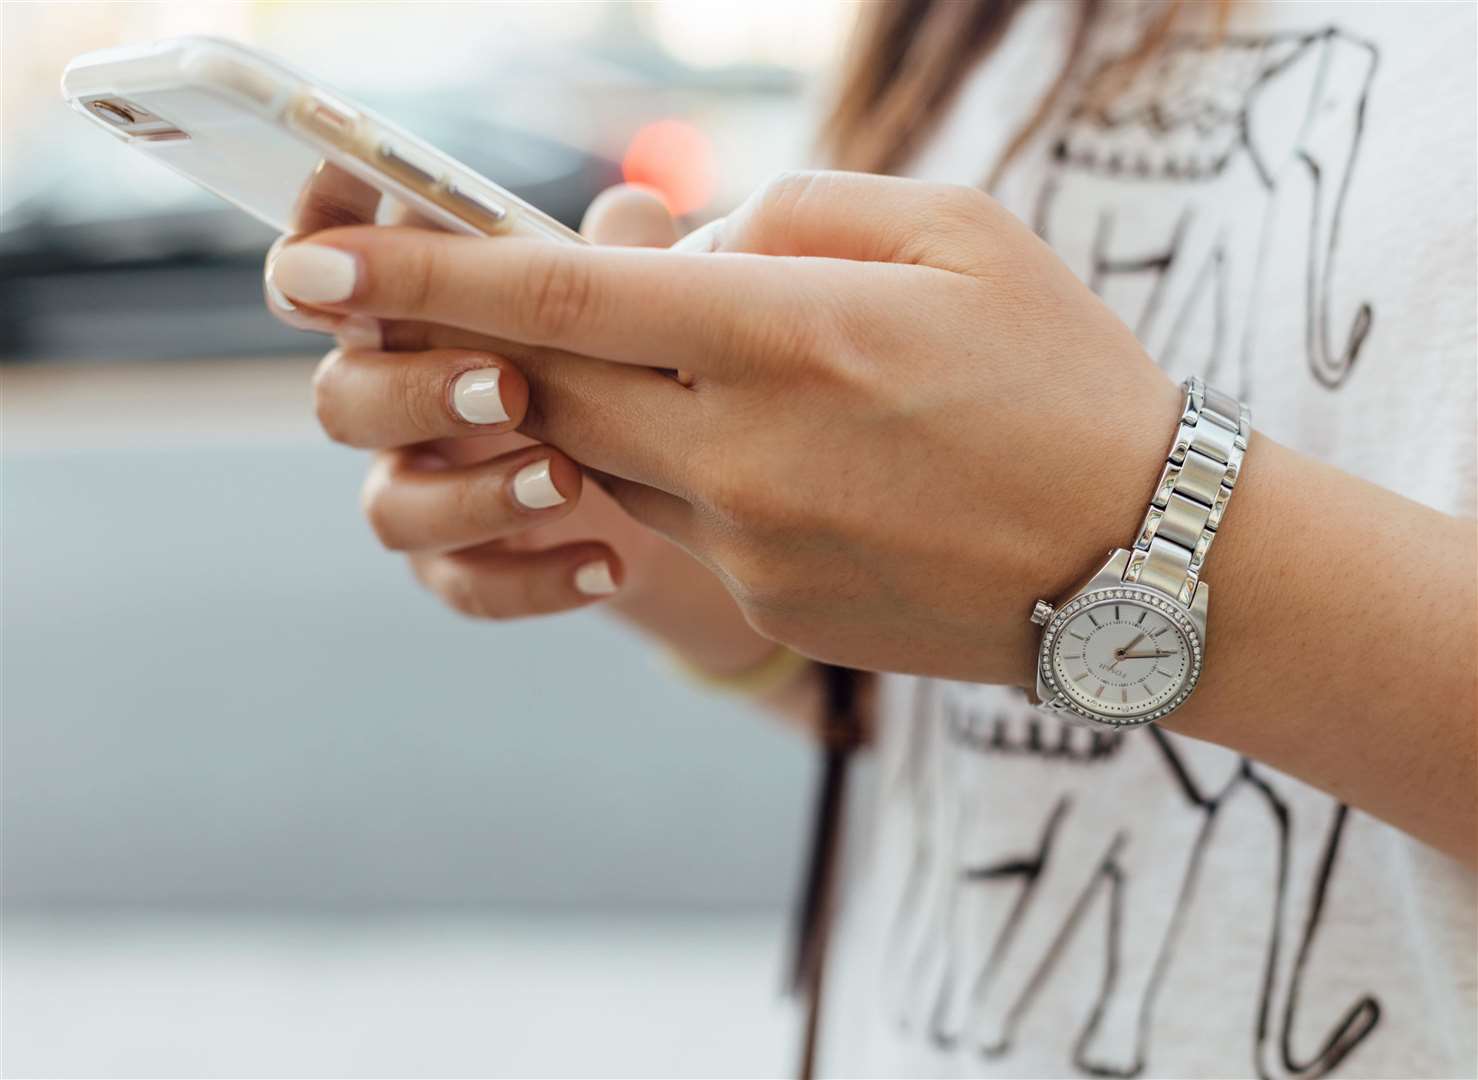 Check your phone regularly, is among the advice. Image: iStock.